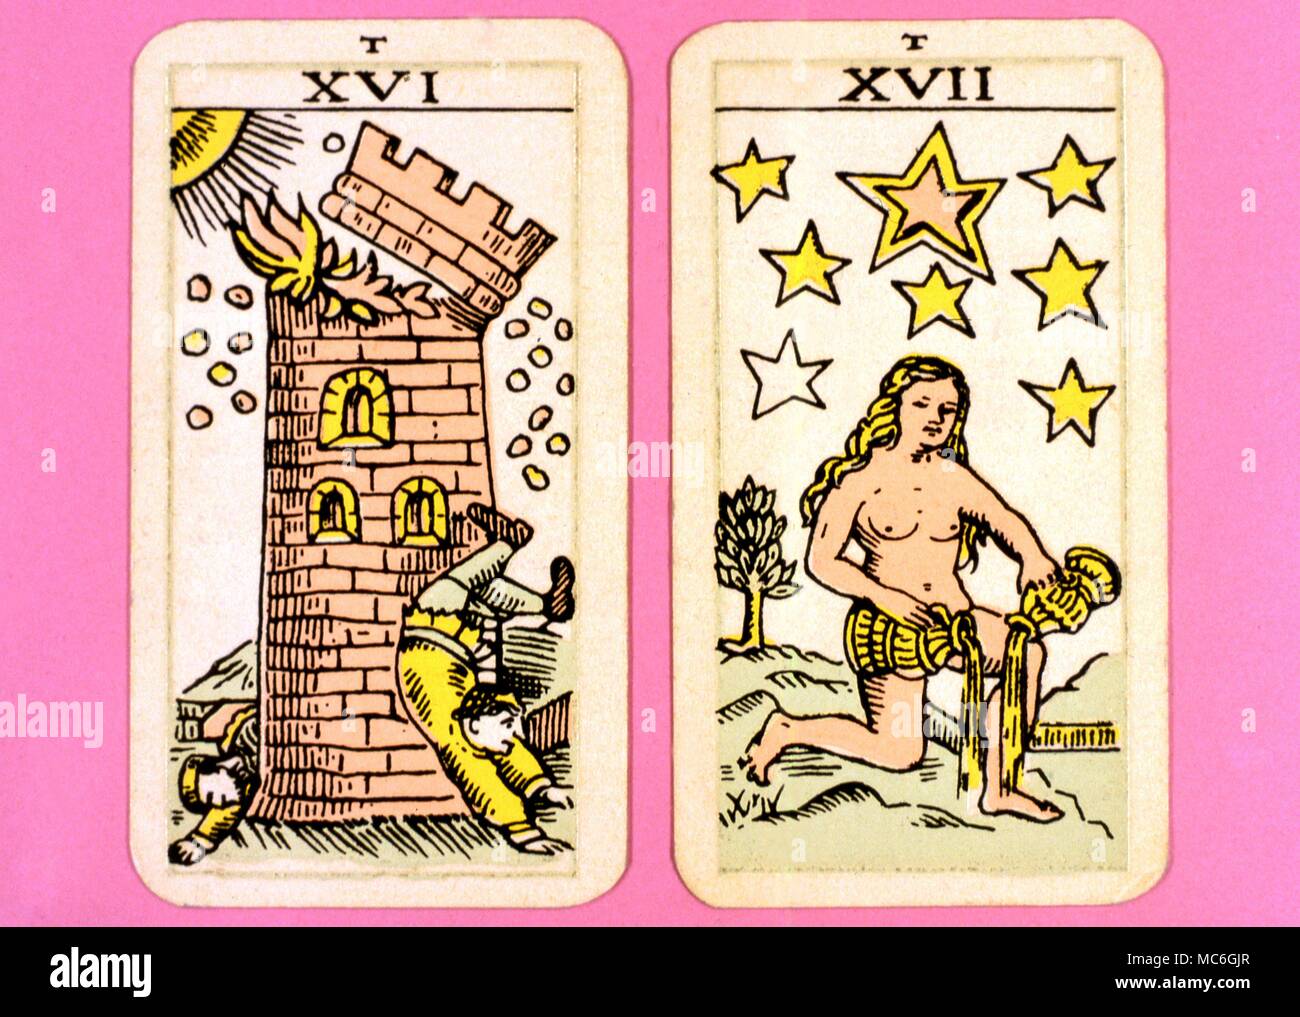 Tarot Cards-Majo Arcana- The Parisian Tarot. Card 16. The House of God, and Card 17. The Star. Two cards from a Major Arcana picture Tarot,adapted by a Wiccan group. Probably designed in an archaizing style in loose imitation of the Rosicrucian deck designed by Pamela Coleman Smith, alongside A.E.Waite, and various earlier decks, such as that published by Encausse (Papus) in The Tarot of the Bohemians at the end of the 19th century, post 1905, but earlier than 1912. The name Parisian Tarot was given by the owner of the deck - it might however be called the Tau Tarot, from the intriguing lette Stock Photo